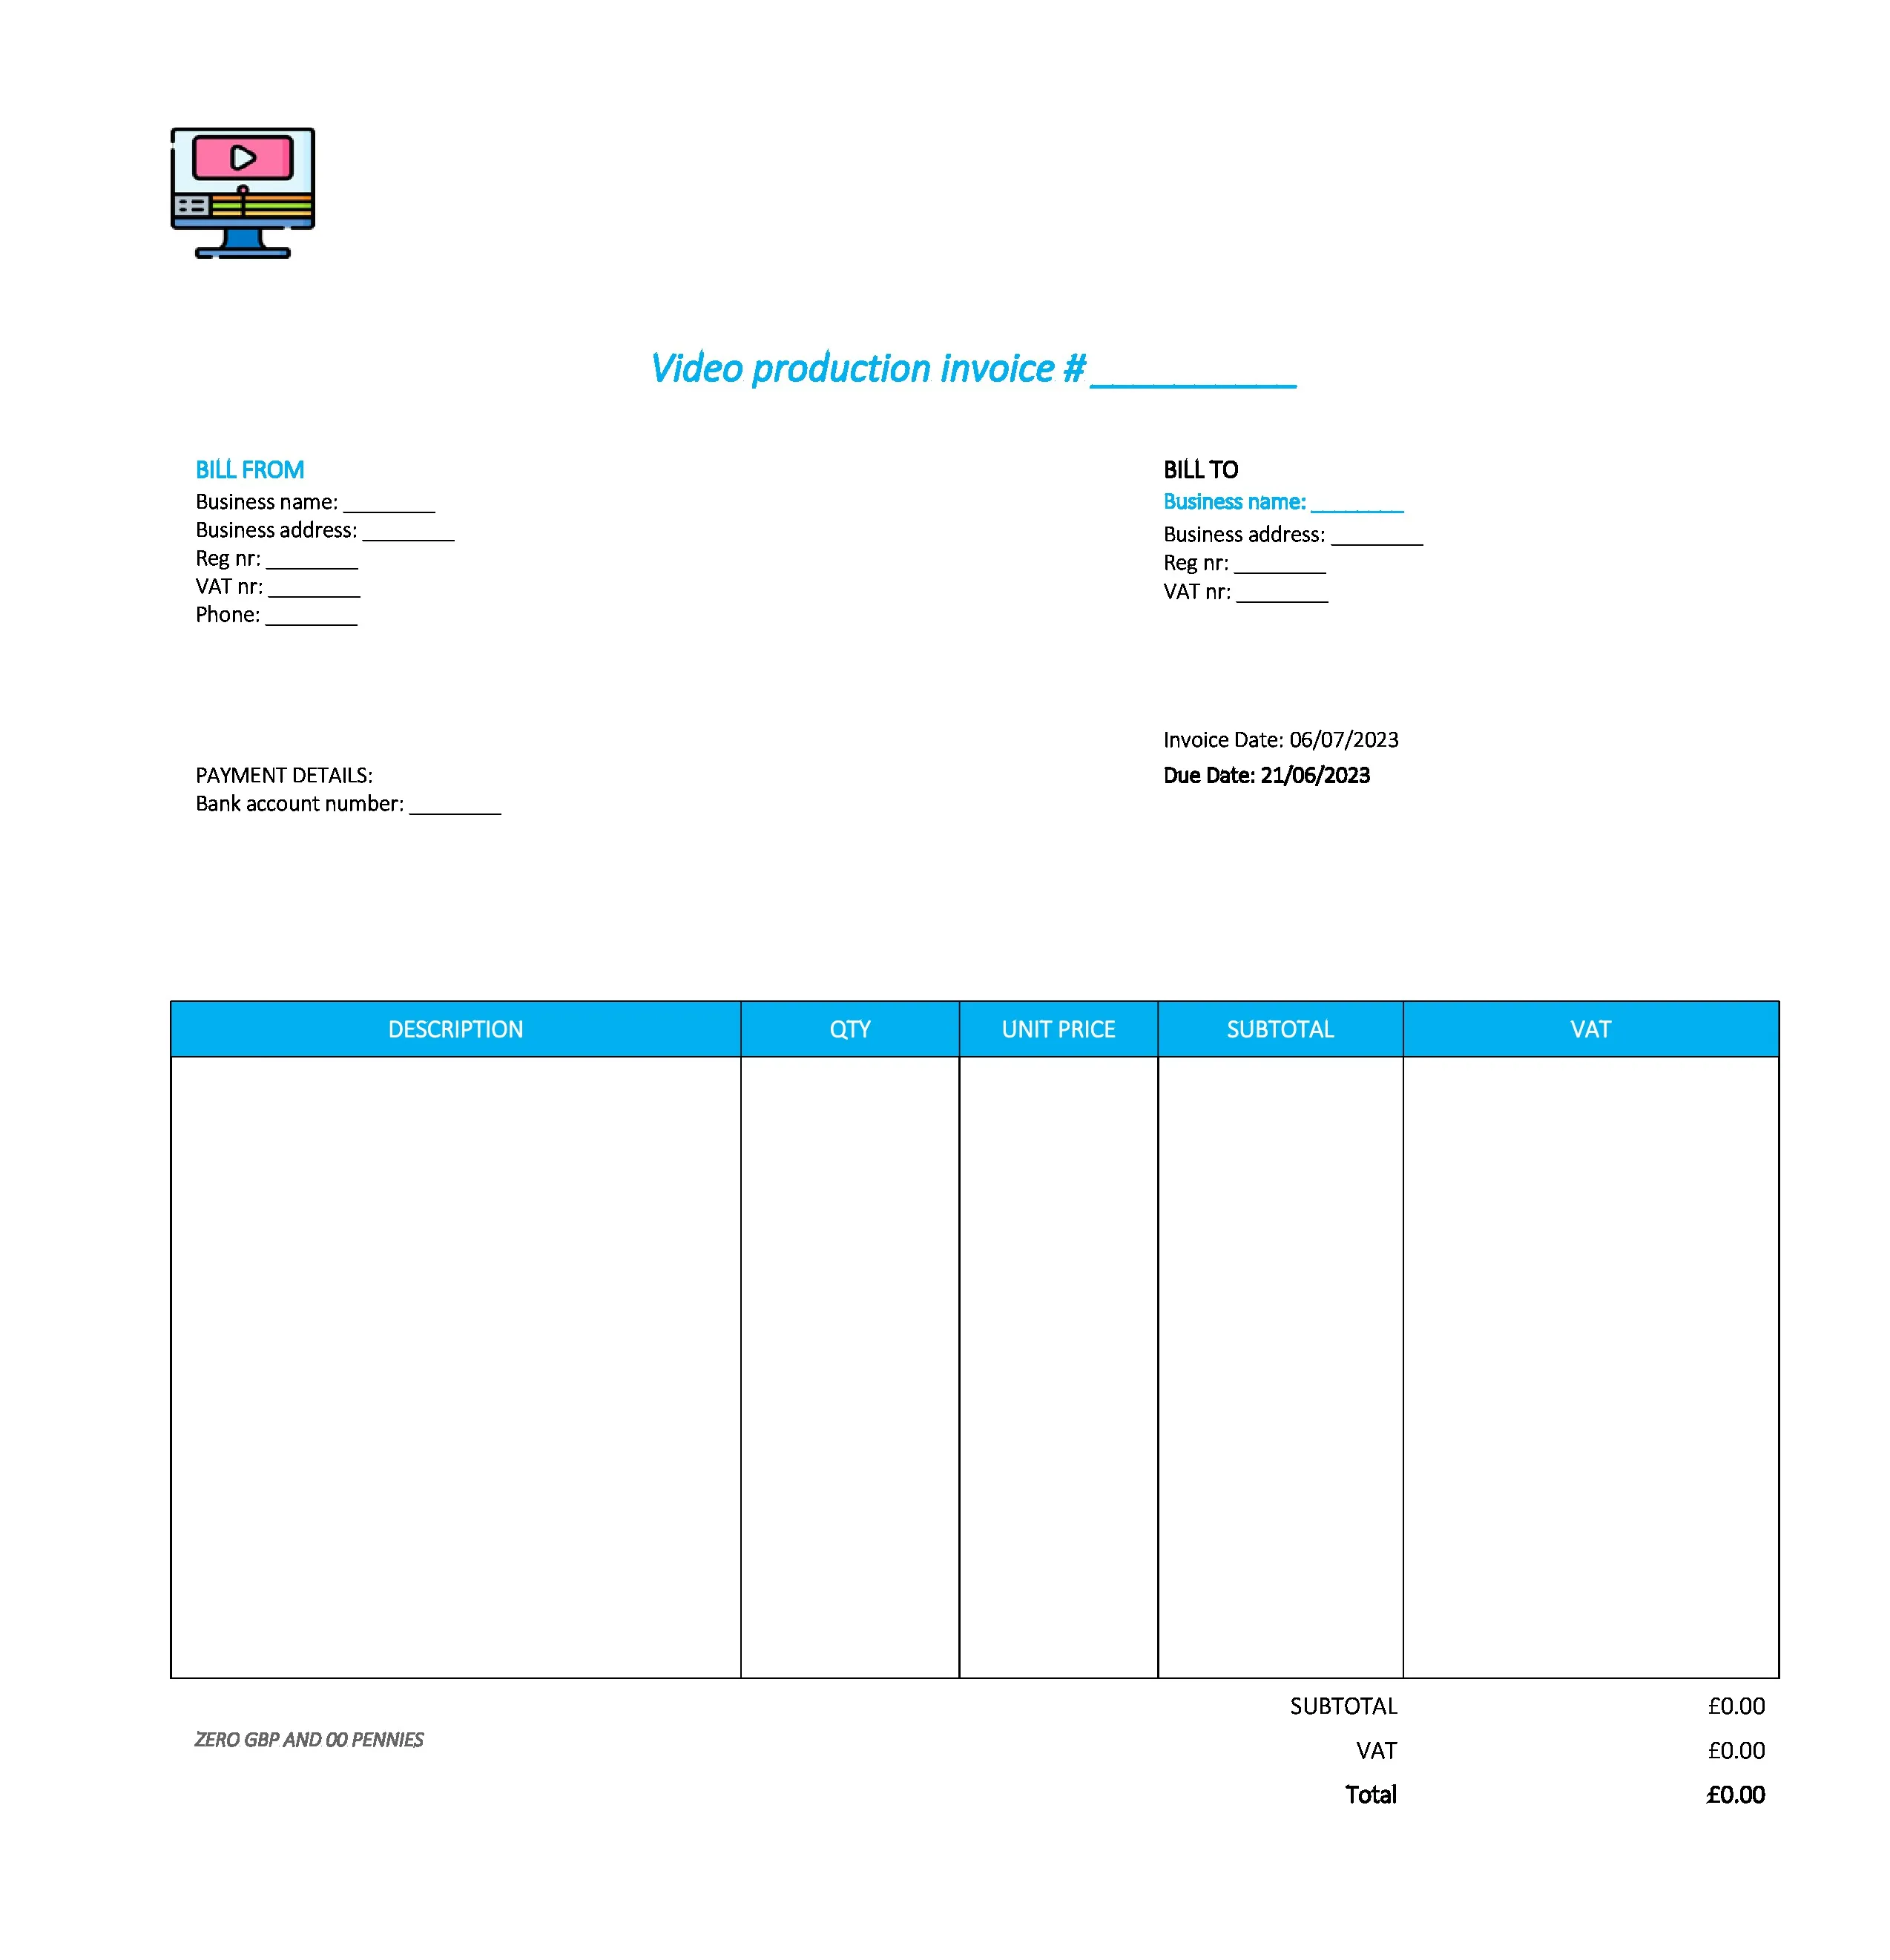 good video production invoice template UK Excel / Google sheets